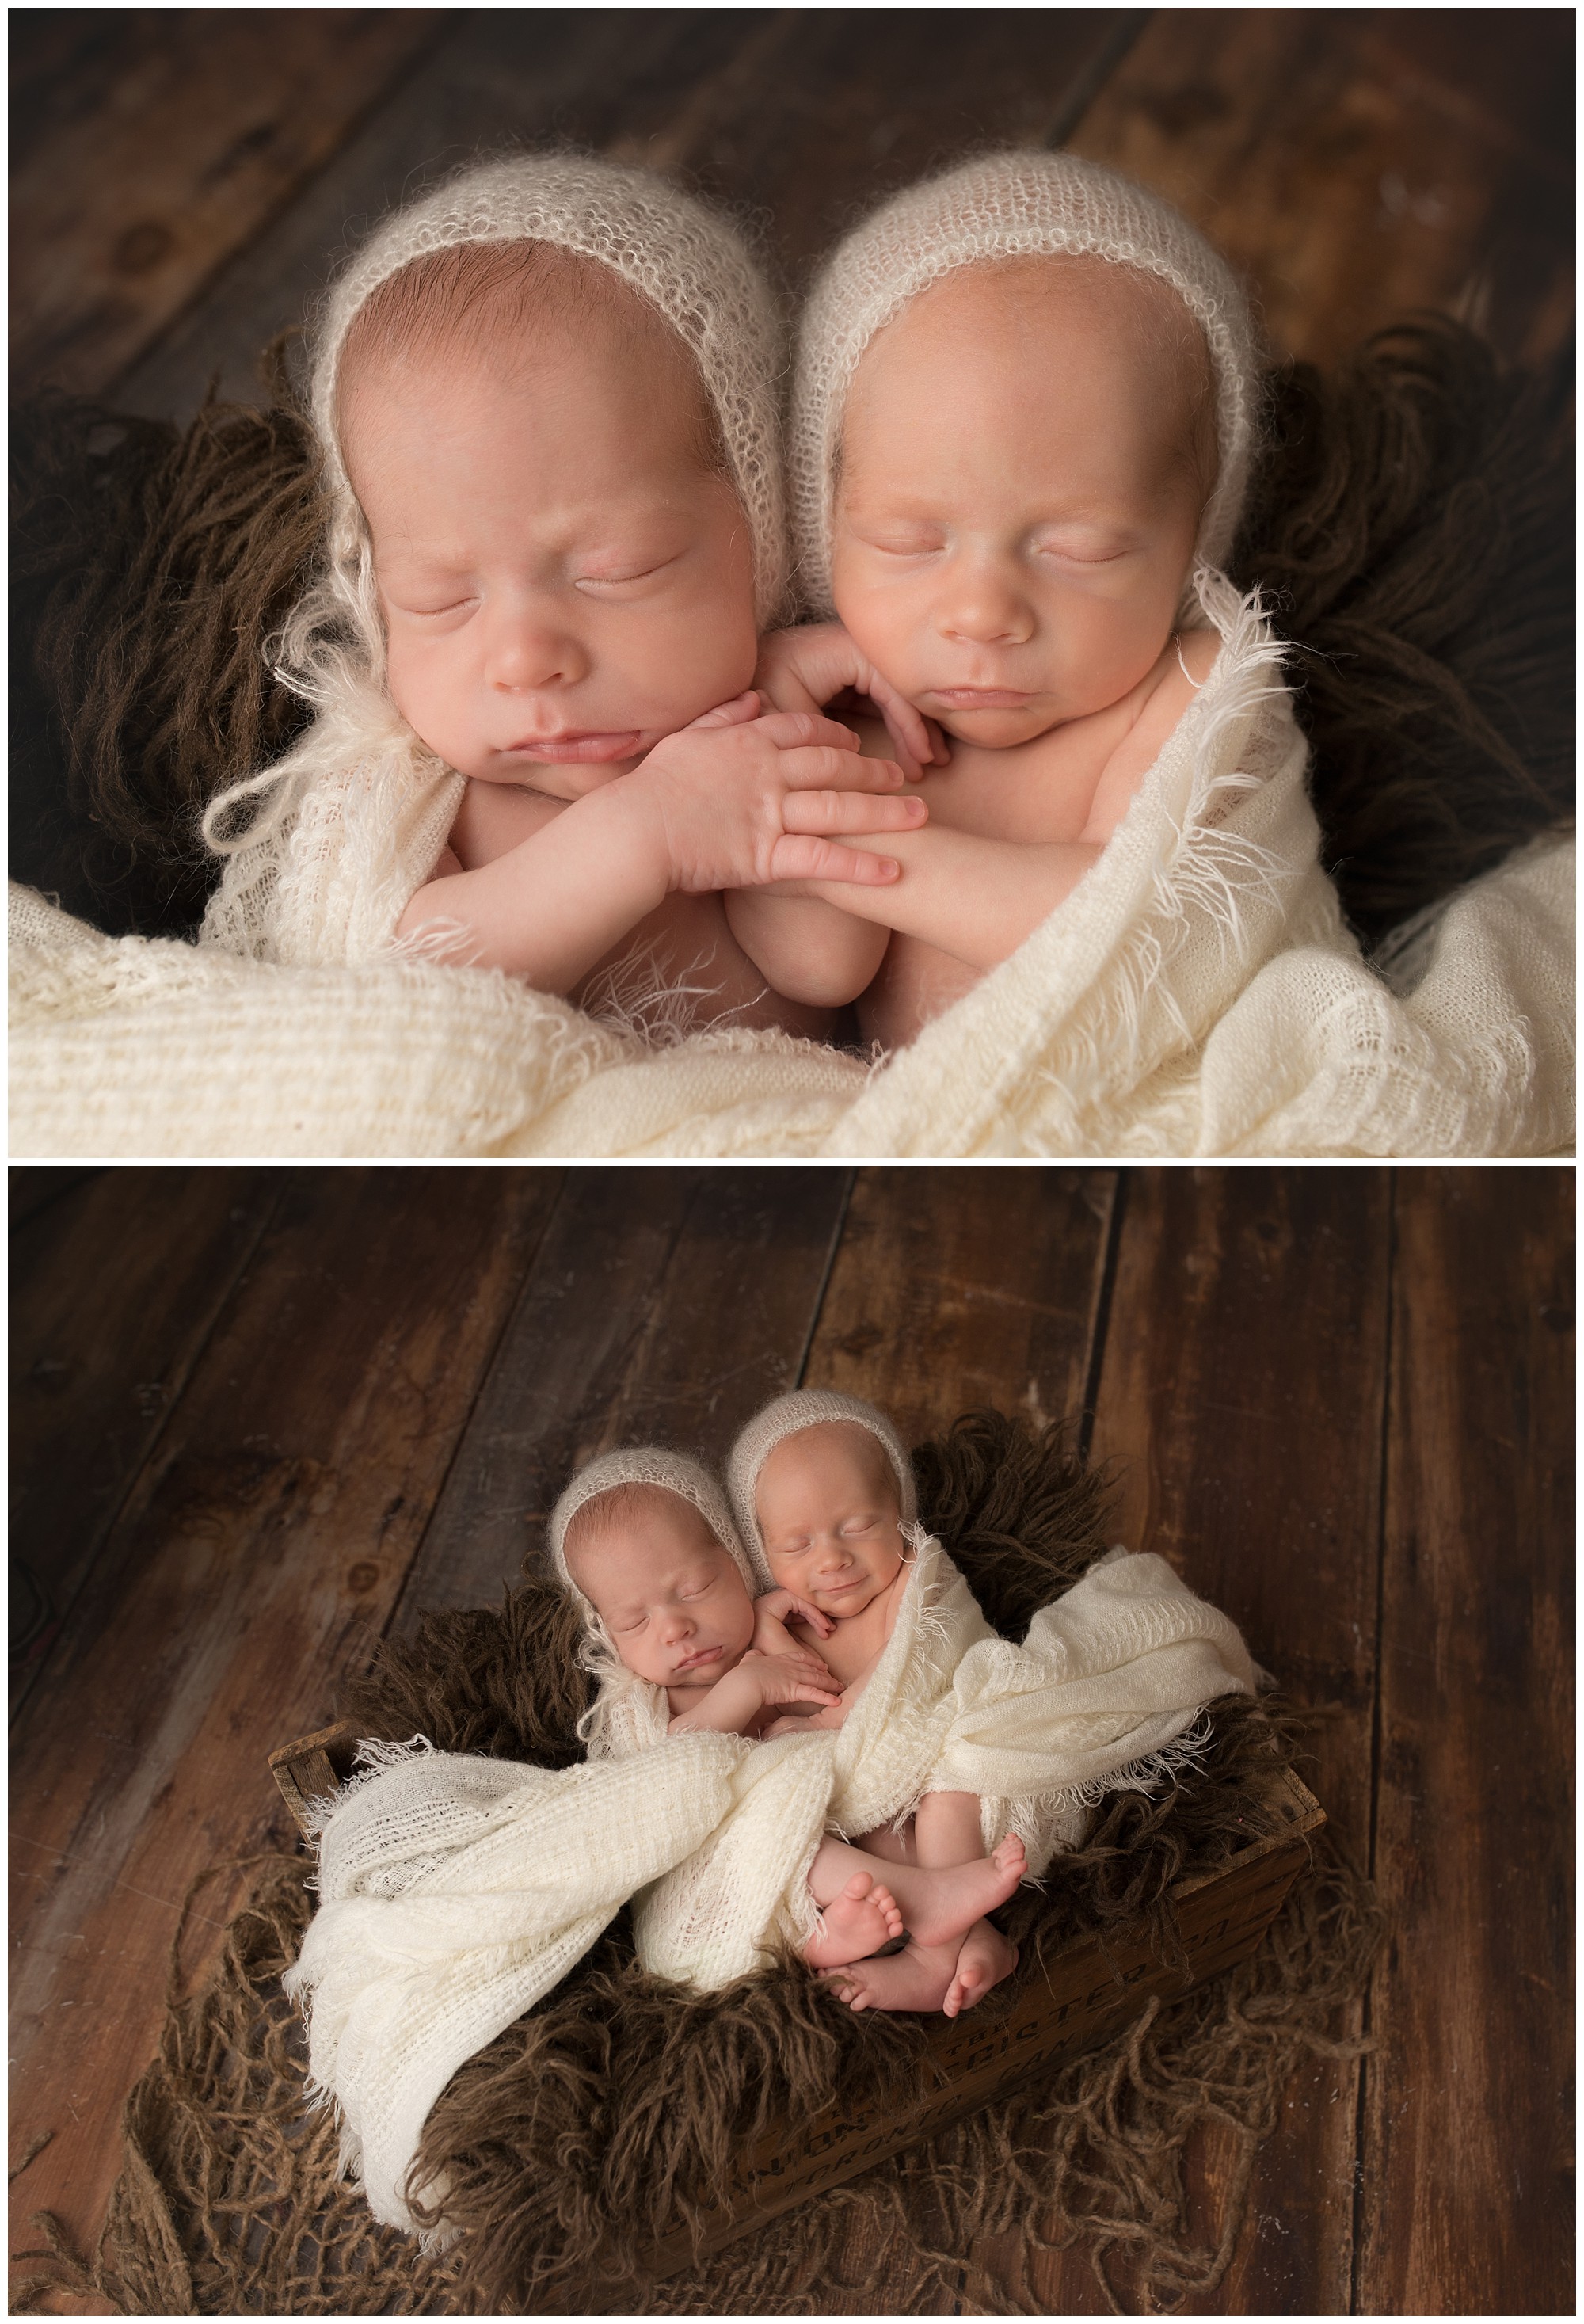 newborn twin boys curled up together and sleeping